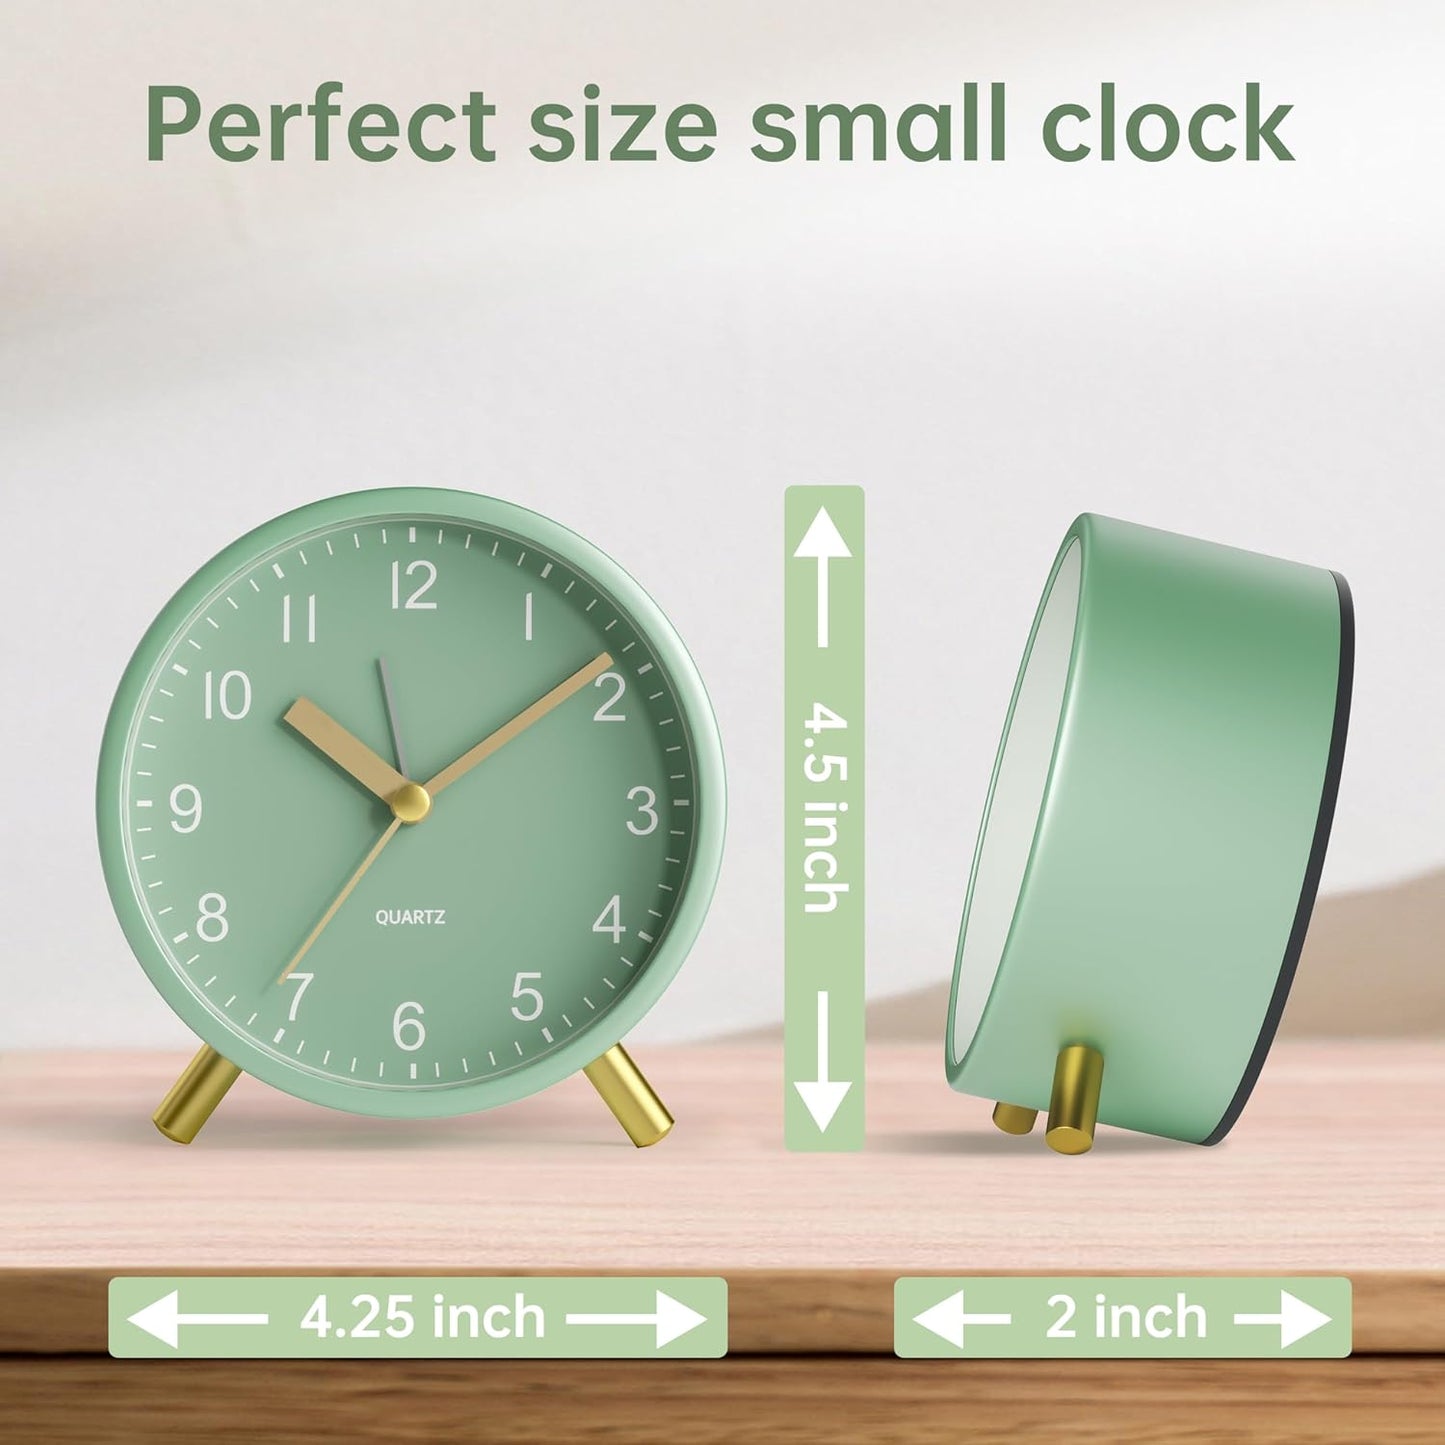 Analog Alarm Clock, 4 Inch Super Silent Non Ticking Small Clock with Night Light, Battery Operated, Simple Design, Easy Setting for Office, Bedroom, Bedside, Desk, Teens, Elders, Kids, Adult, Green